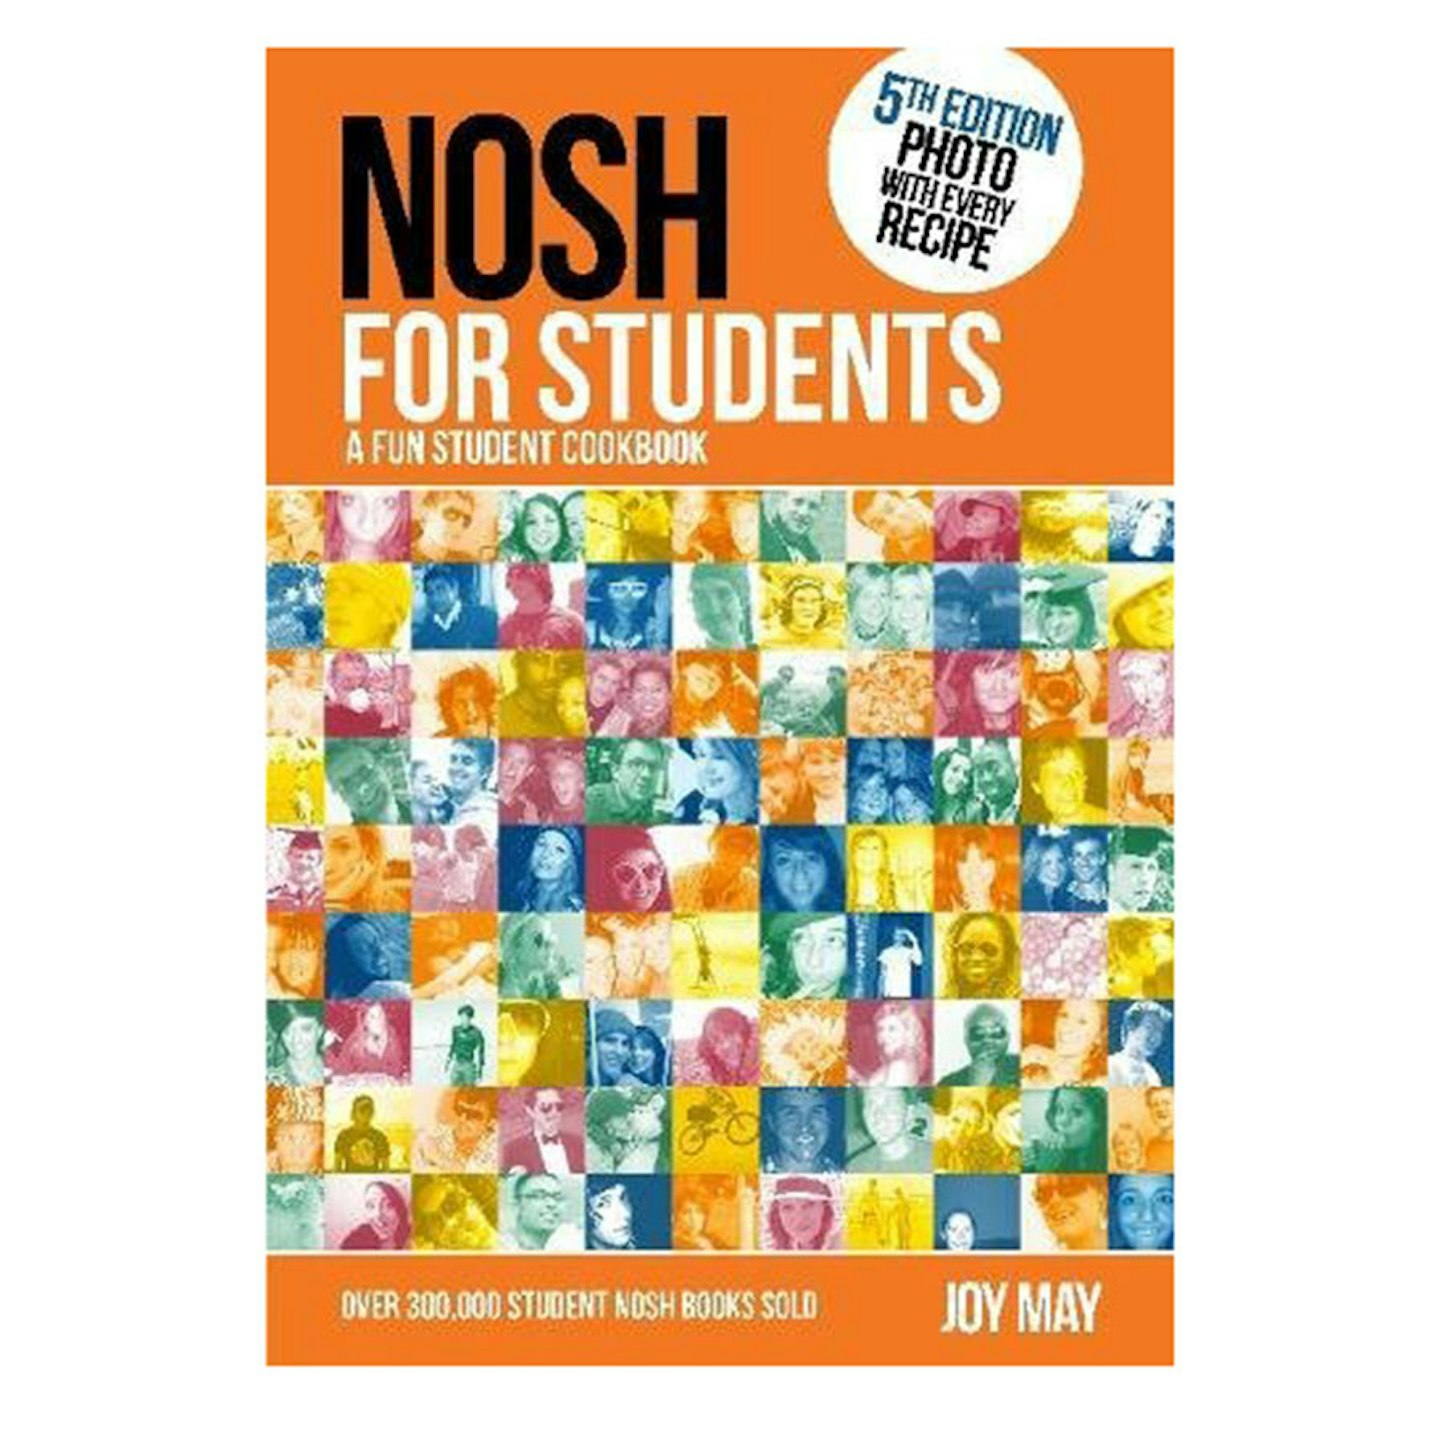 NOSH for Students, by Joy May, £7.54